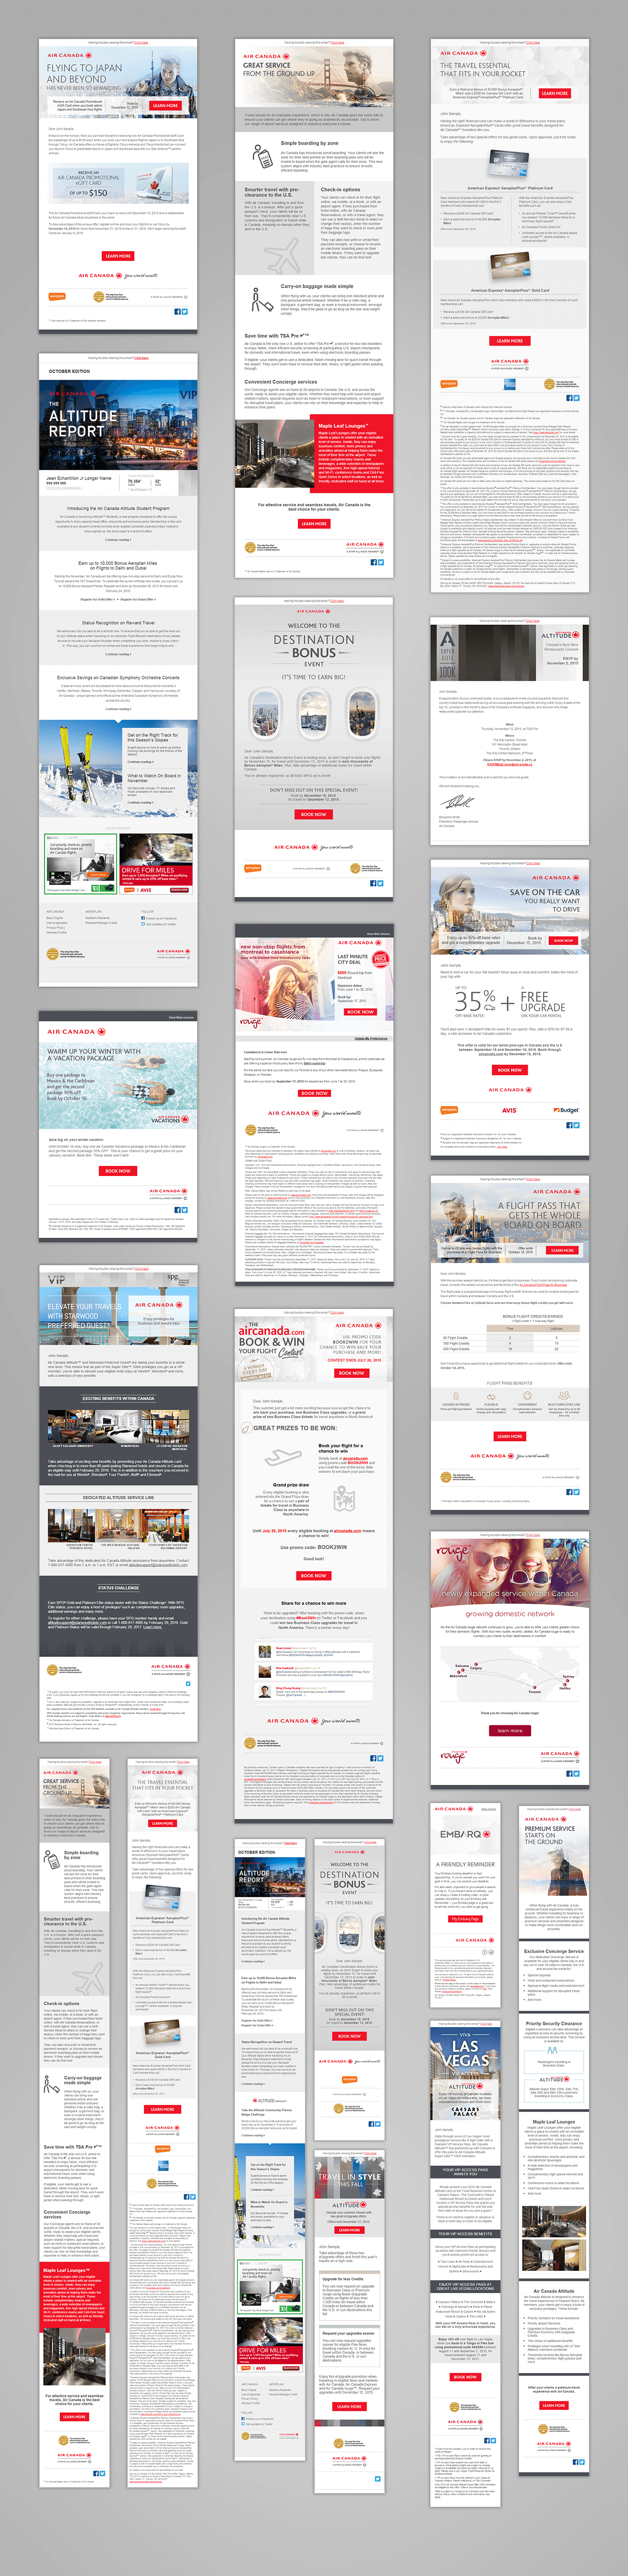 Screen captures of various Air Canada promotional emails.